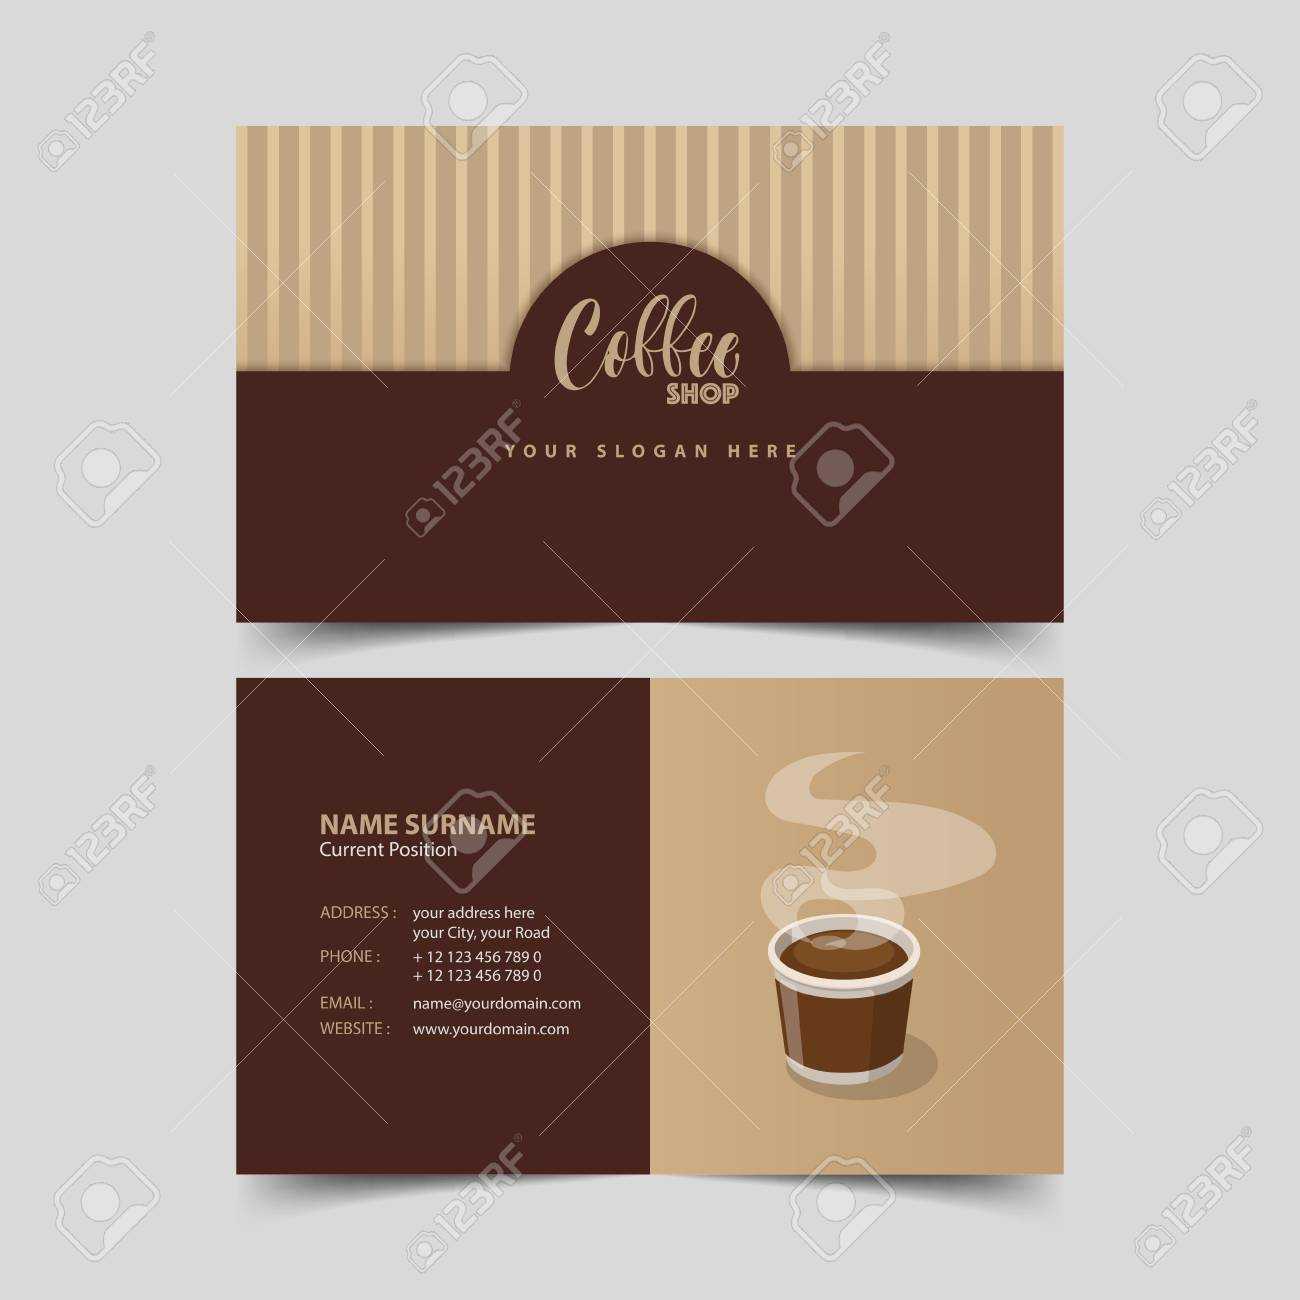 Coffee Shop Business Card Design Template. For Coffee Business Card Template Free